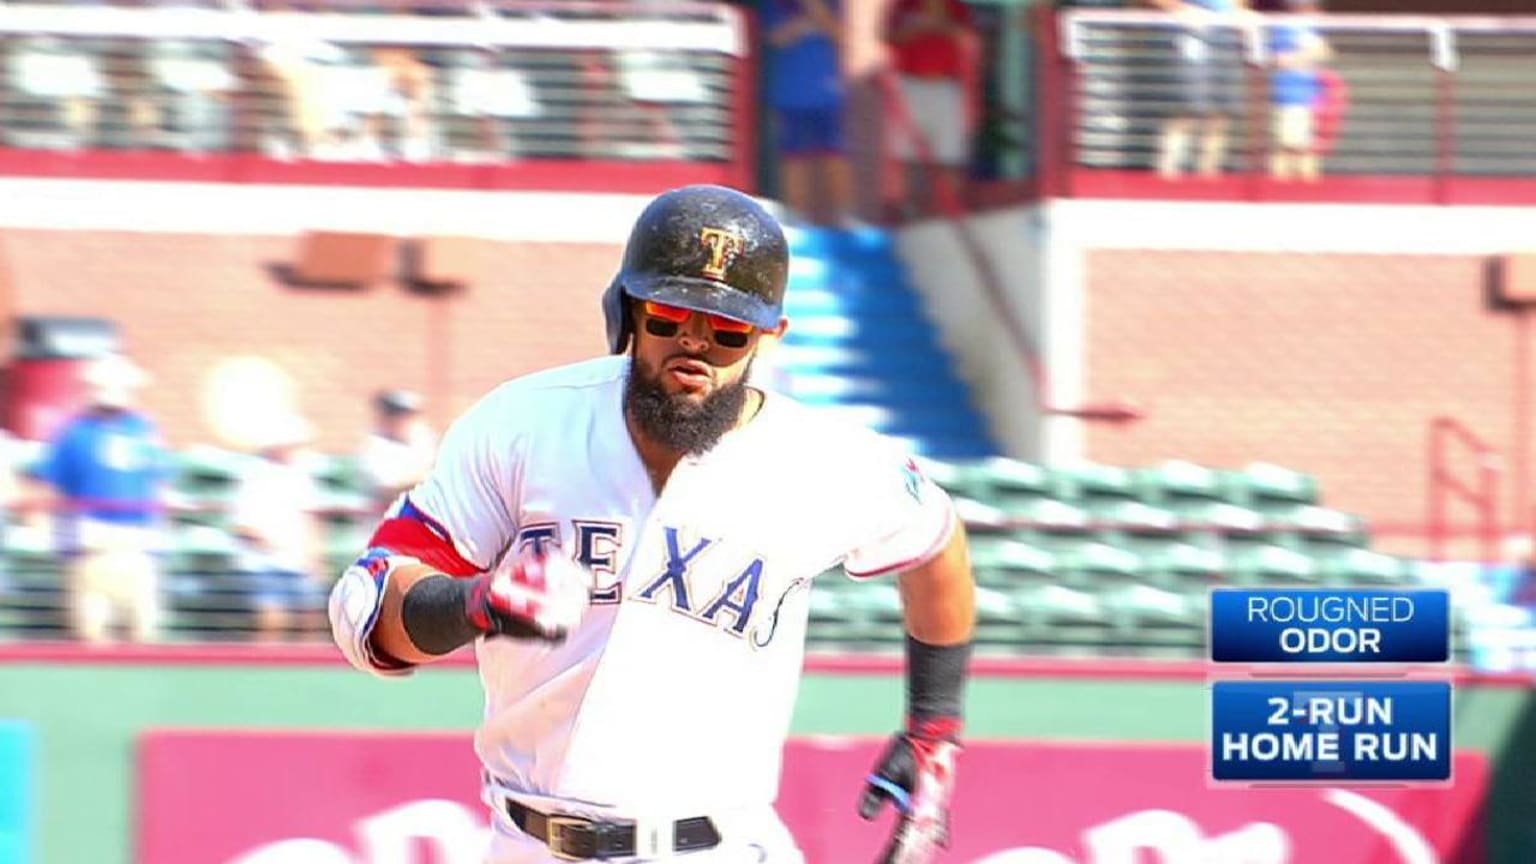 MLB fans react to Rougned Odor's odd fashion choice